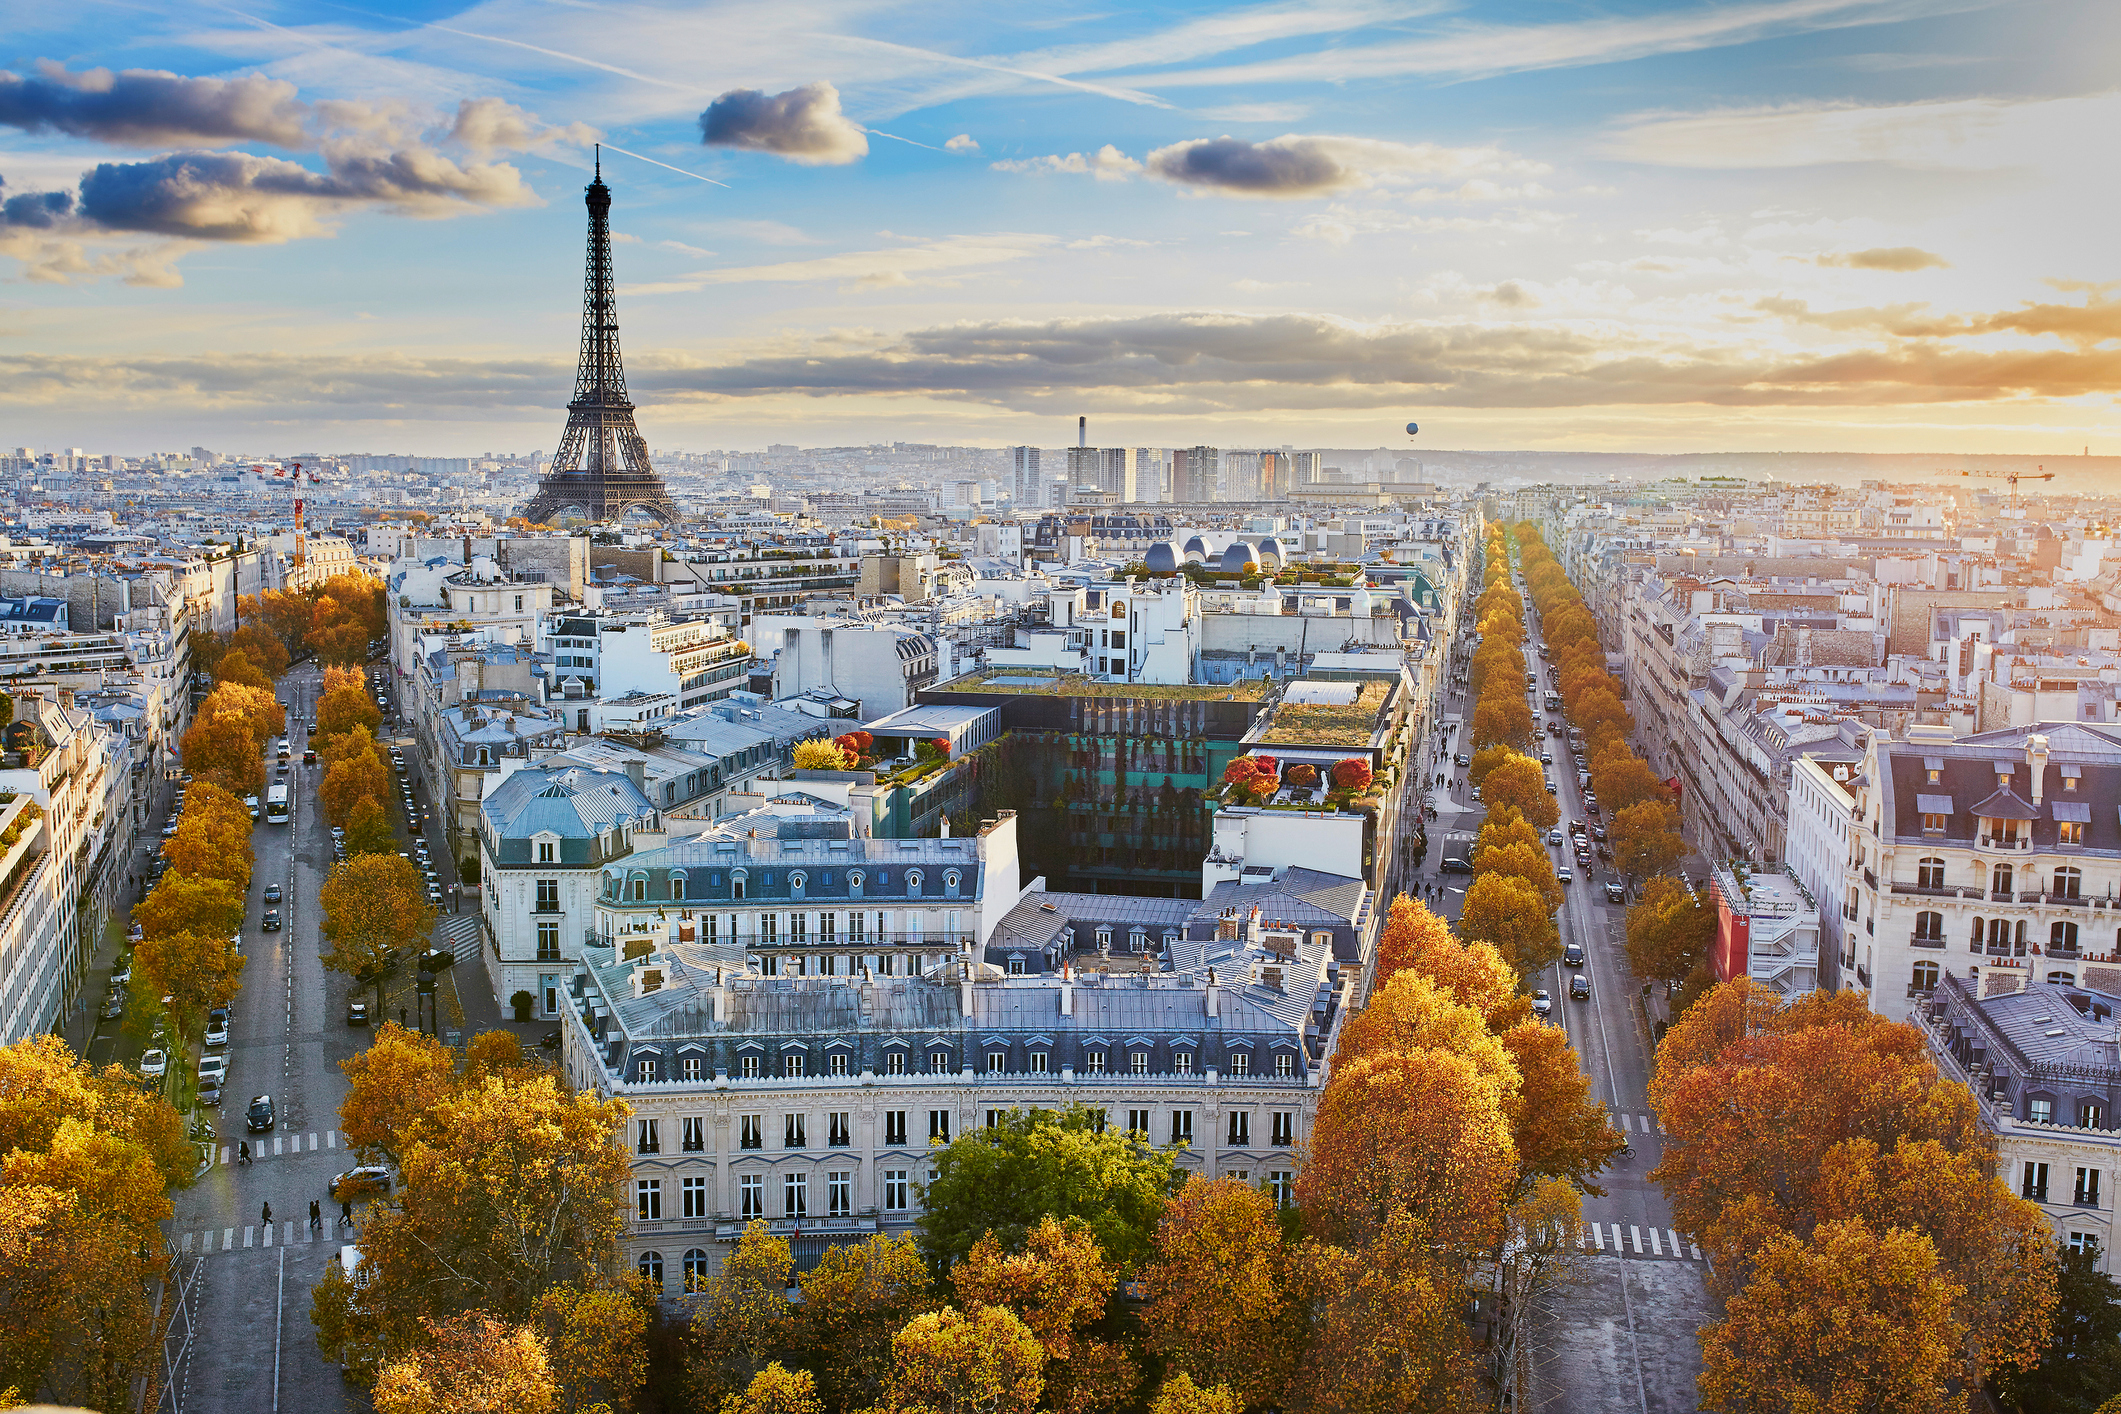 Paris and France are seeing a return to normality in the hotel industry